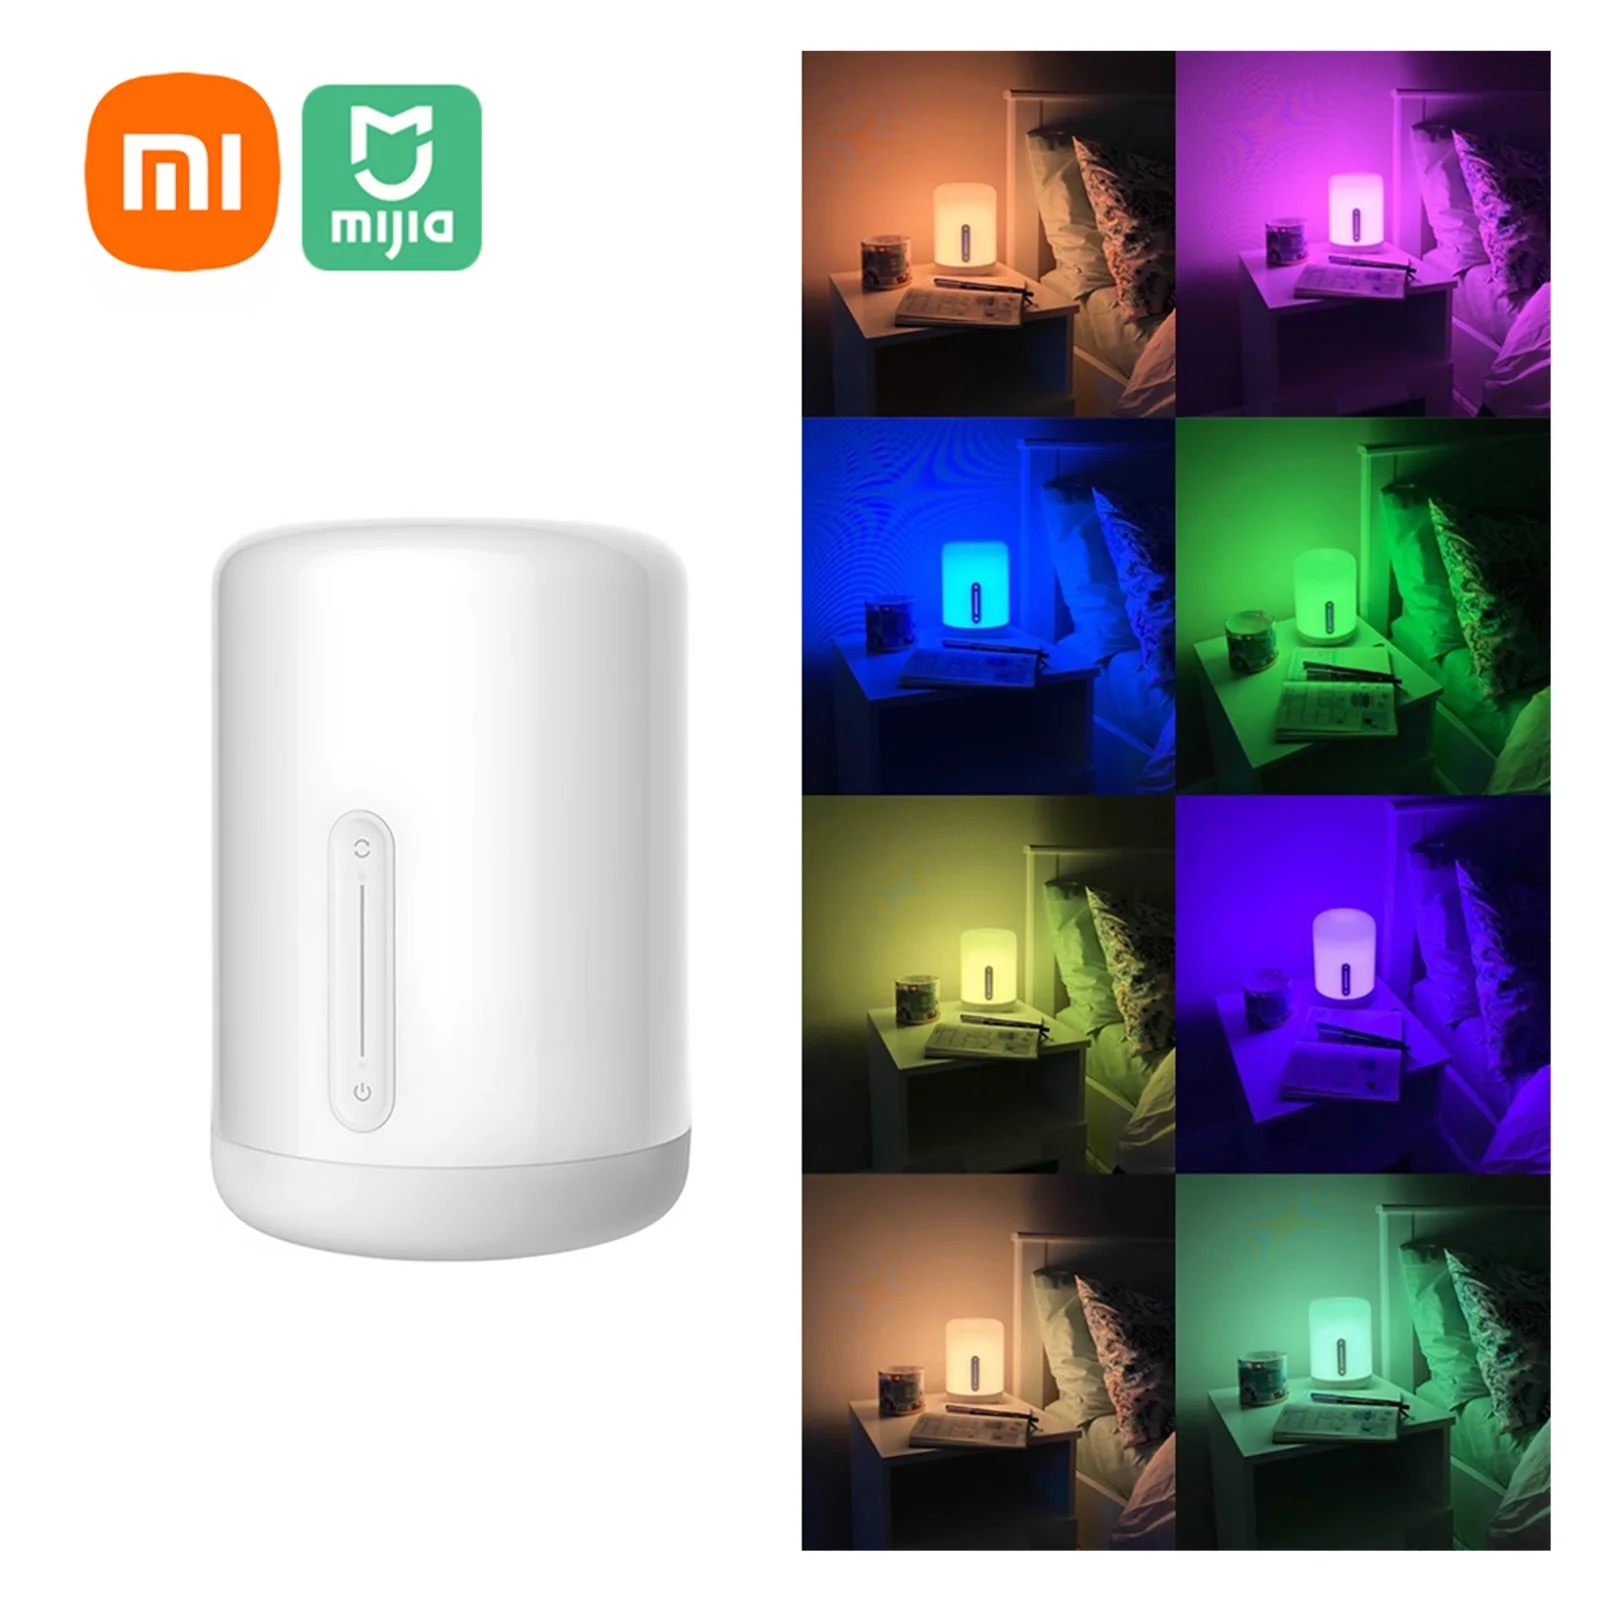 

NEW Xiaomi Mijia Bedside Lamp 2 Bluetooth WiFi Connection Touch Panel APP Control Works For Apple HomeKit Siri Mihome App Home